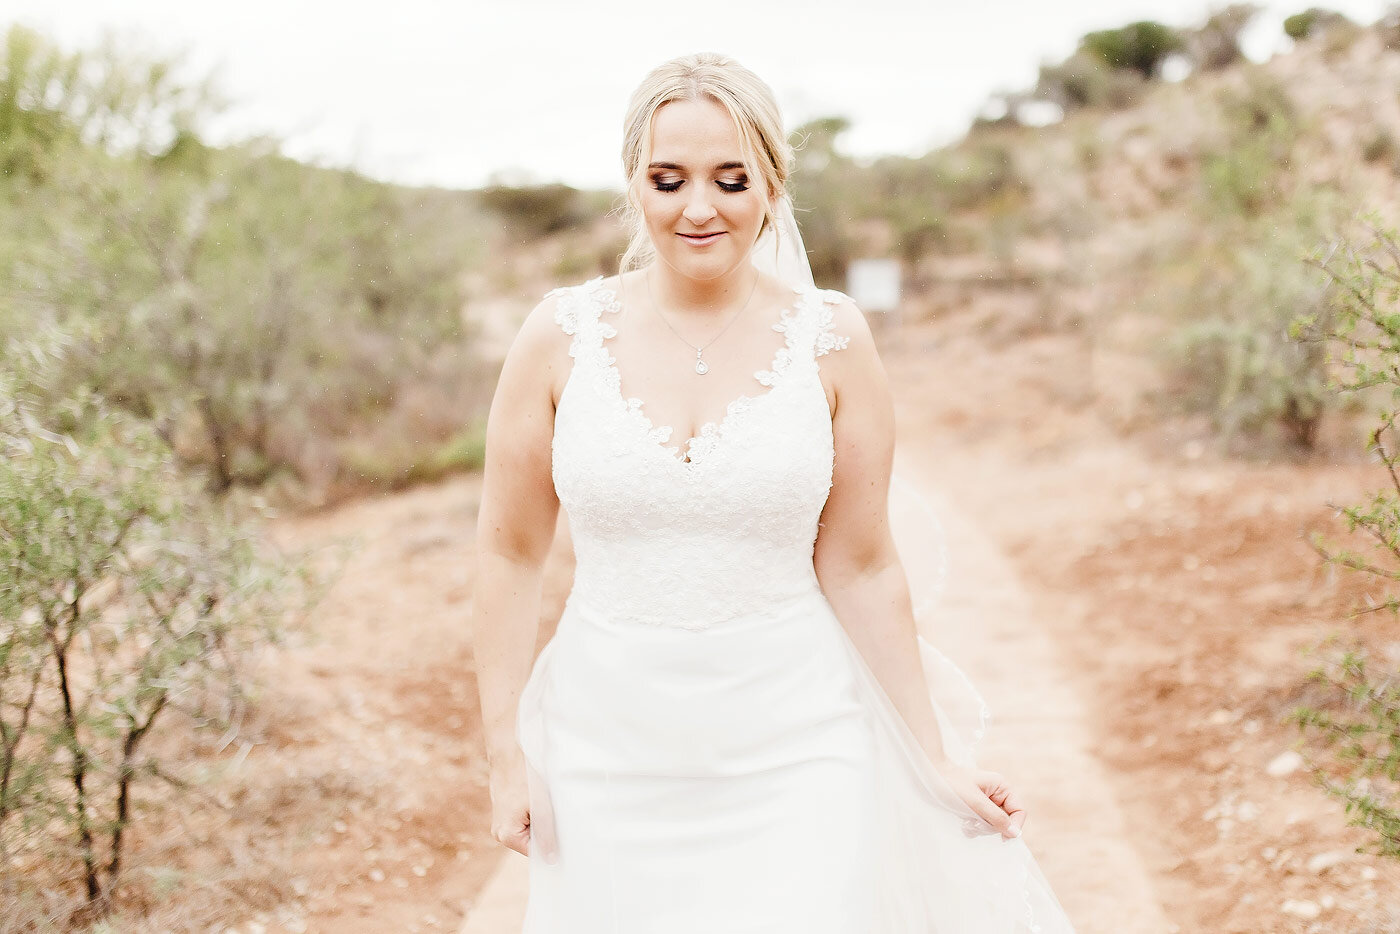 Bridal Portraits in the Karoo.